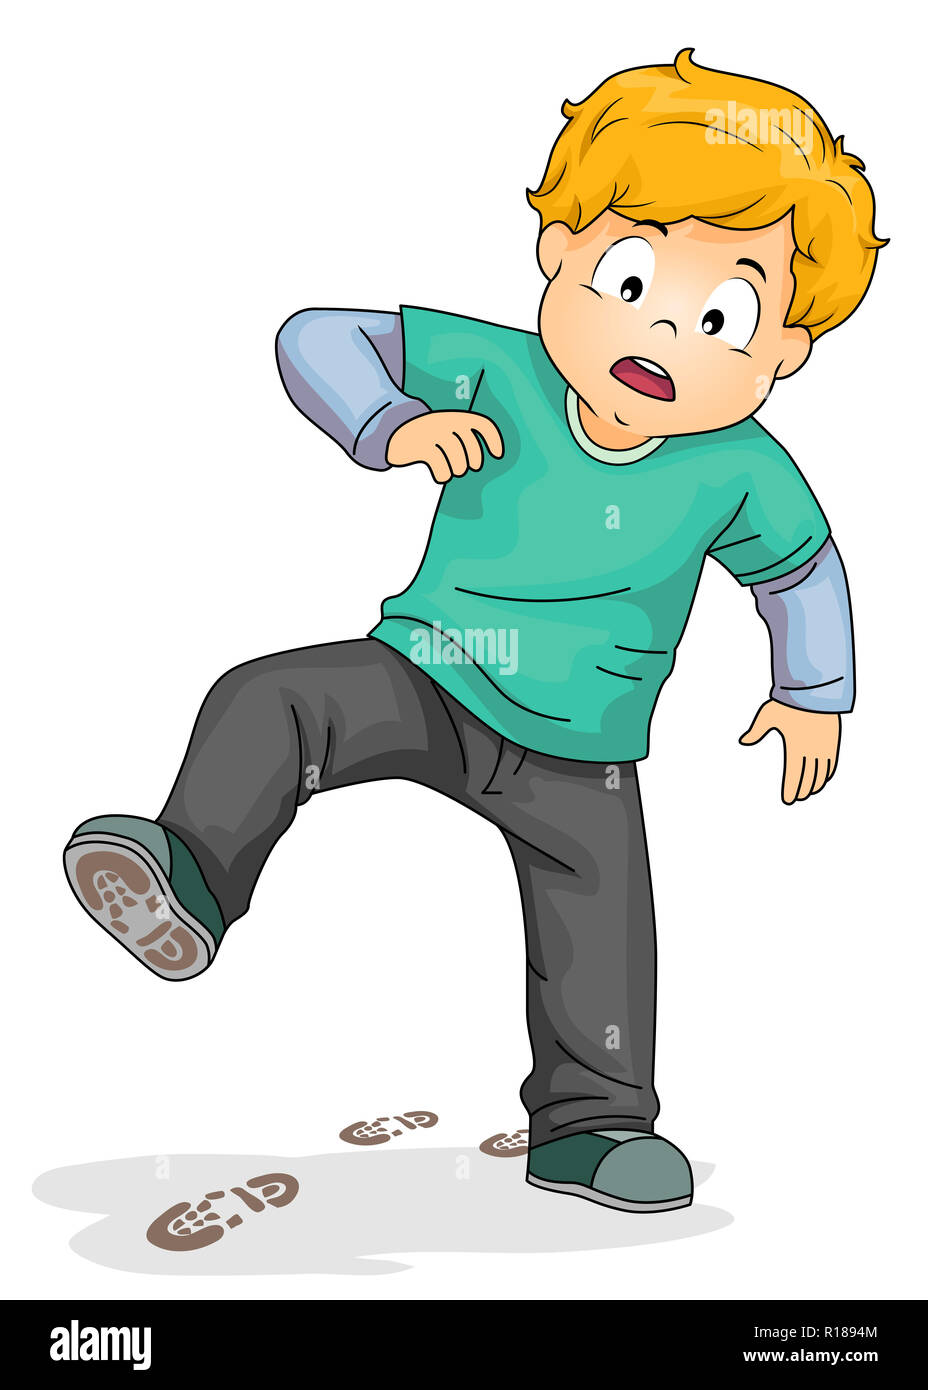 Illustration of a Kid Boy Wearing Dirty Shoes with Shoe Marks on the Floor Stock Photo